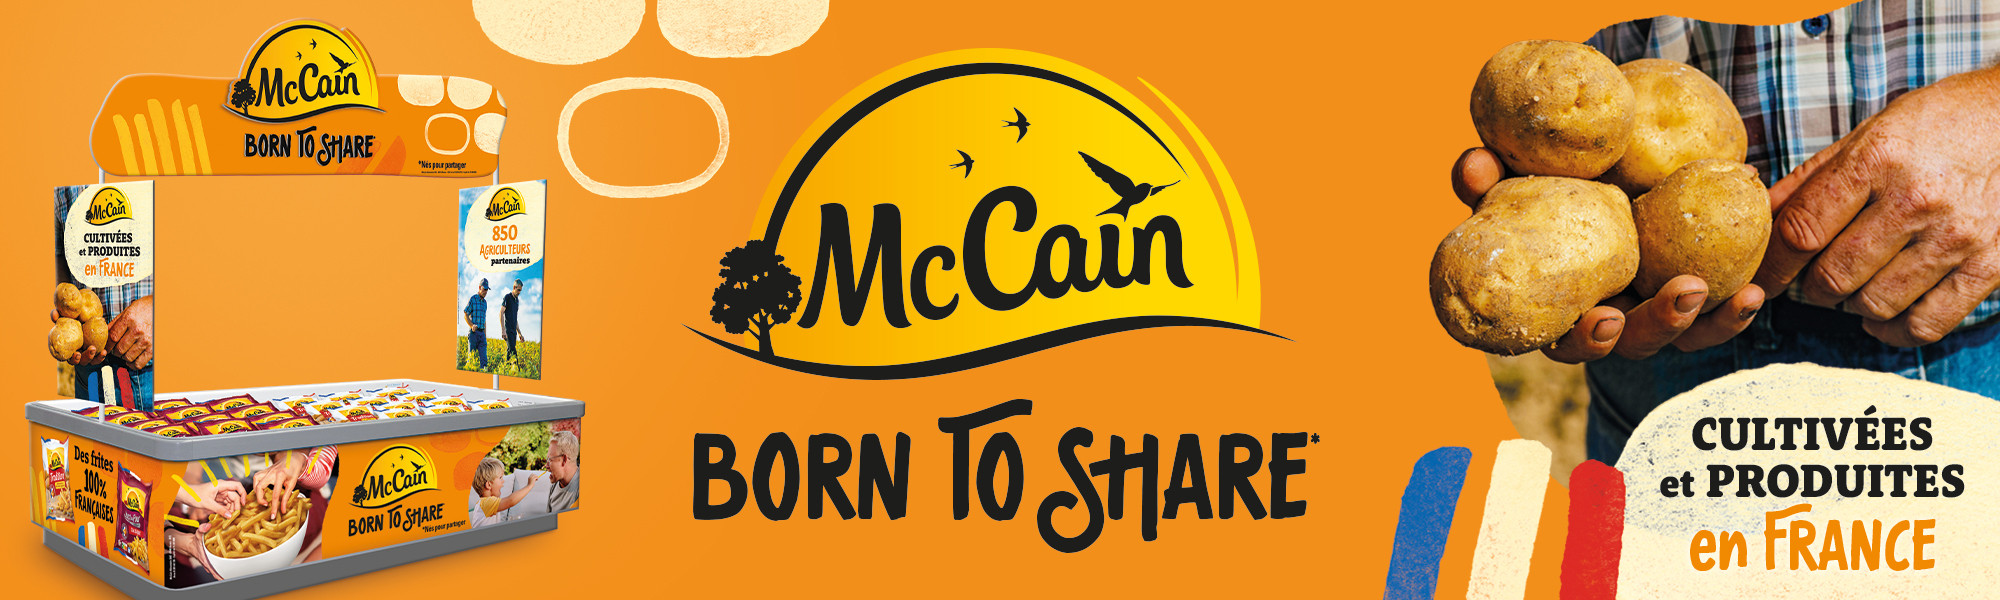 1_ACTIVATION_2000X600px_MCCAIN_MASTERBRAND_